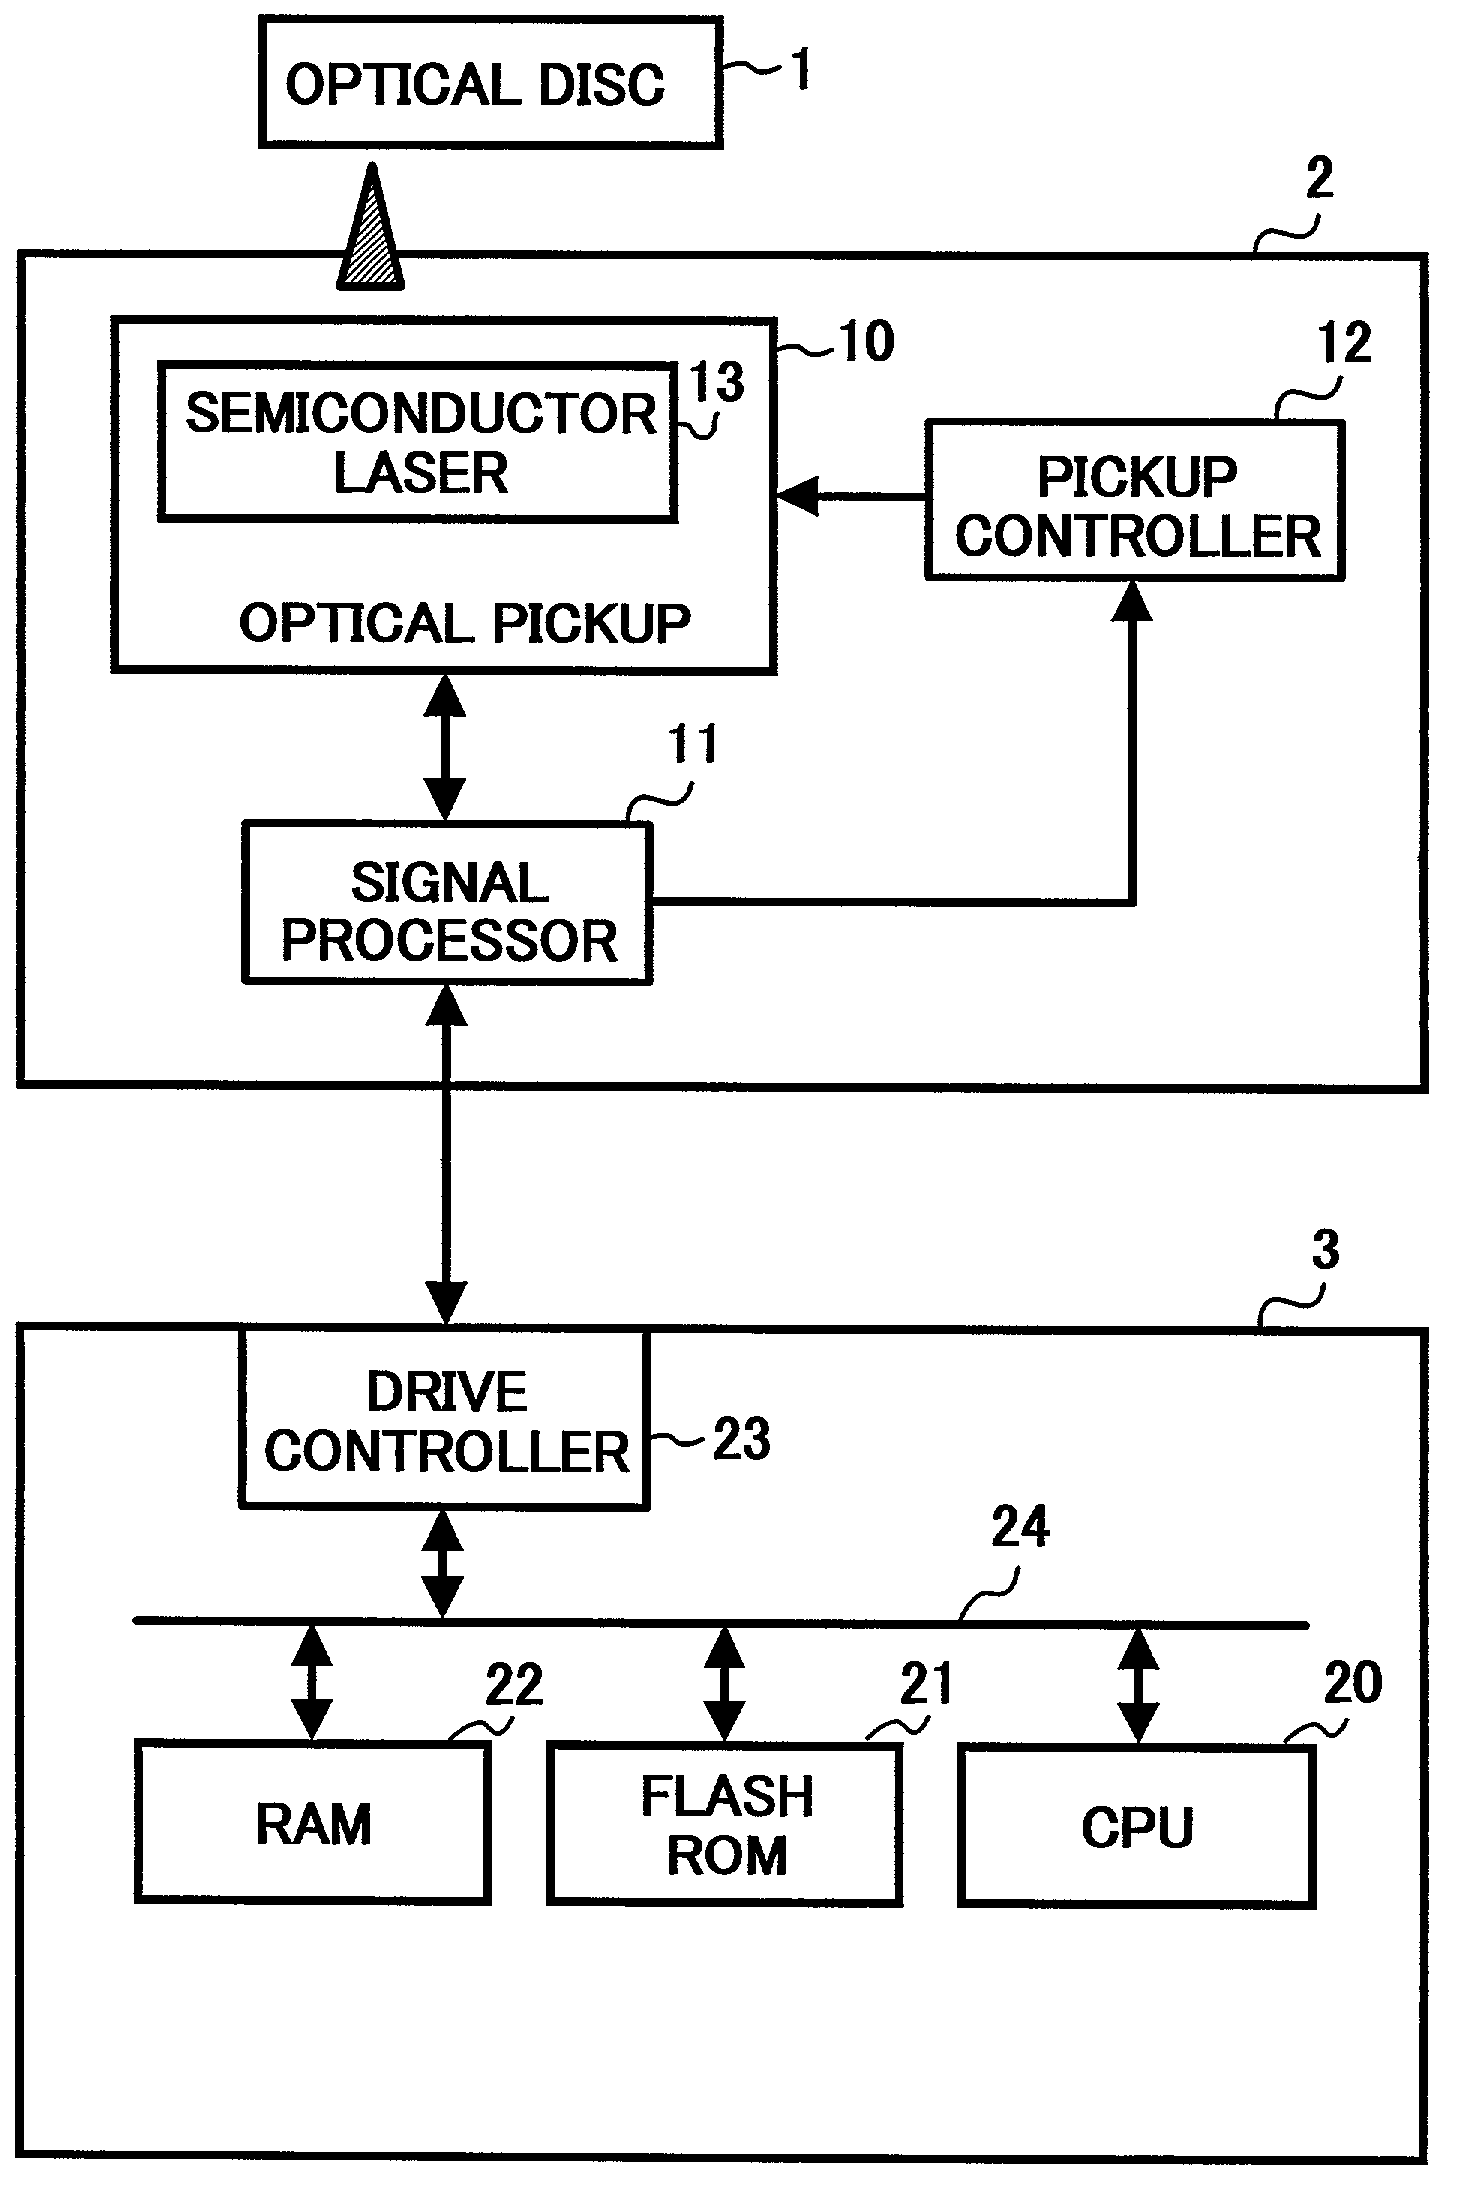 Formatting of phase-change optical disc for improved signal characteristics